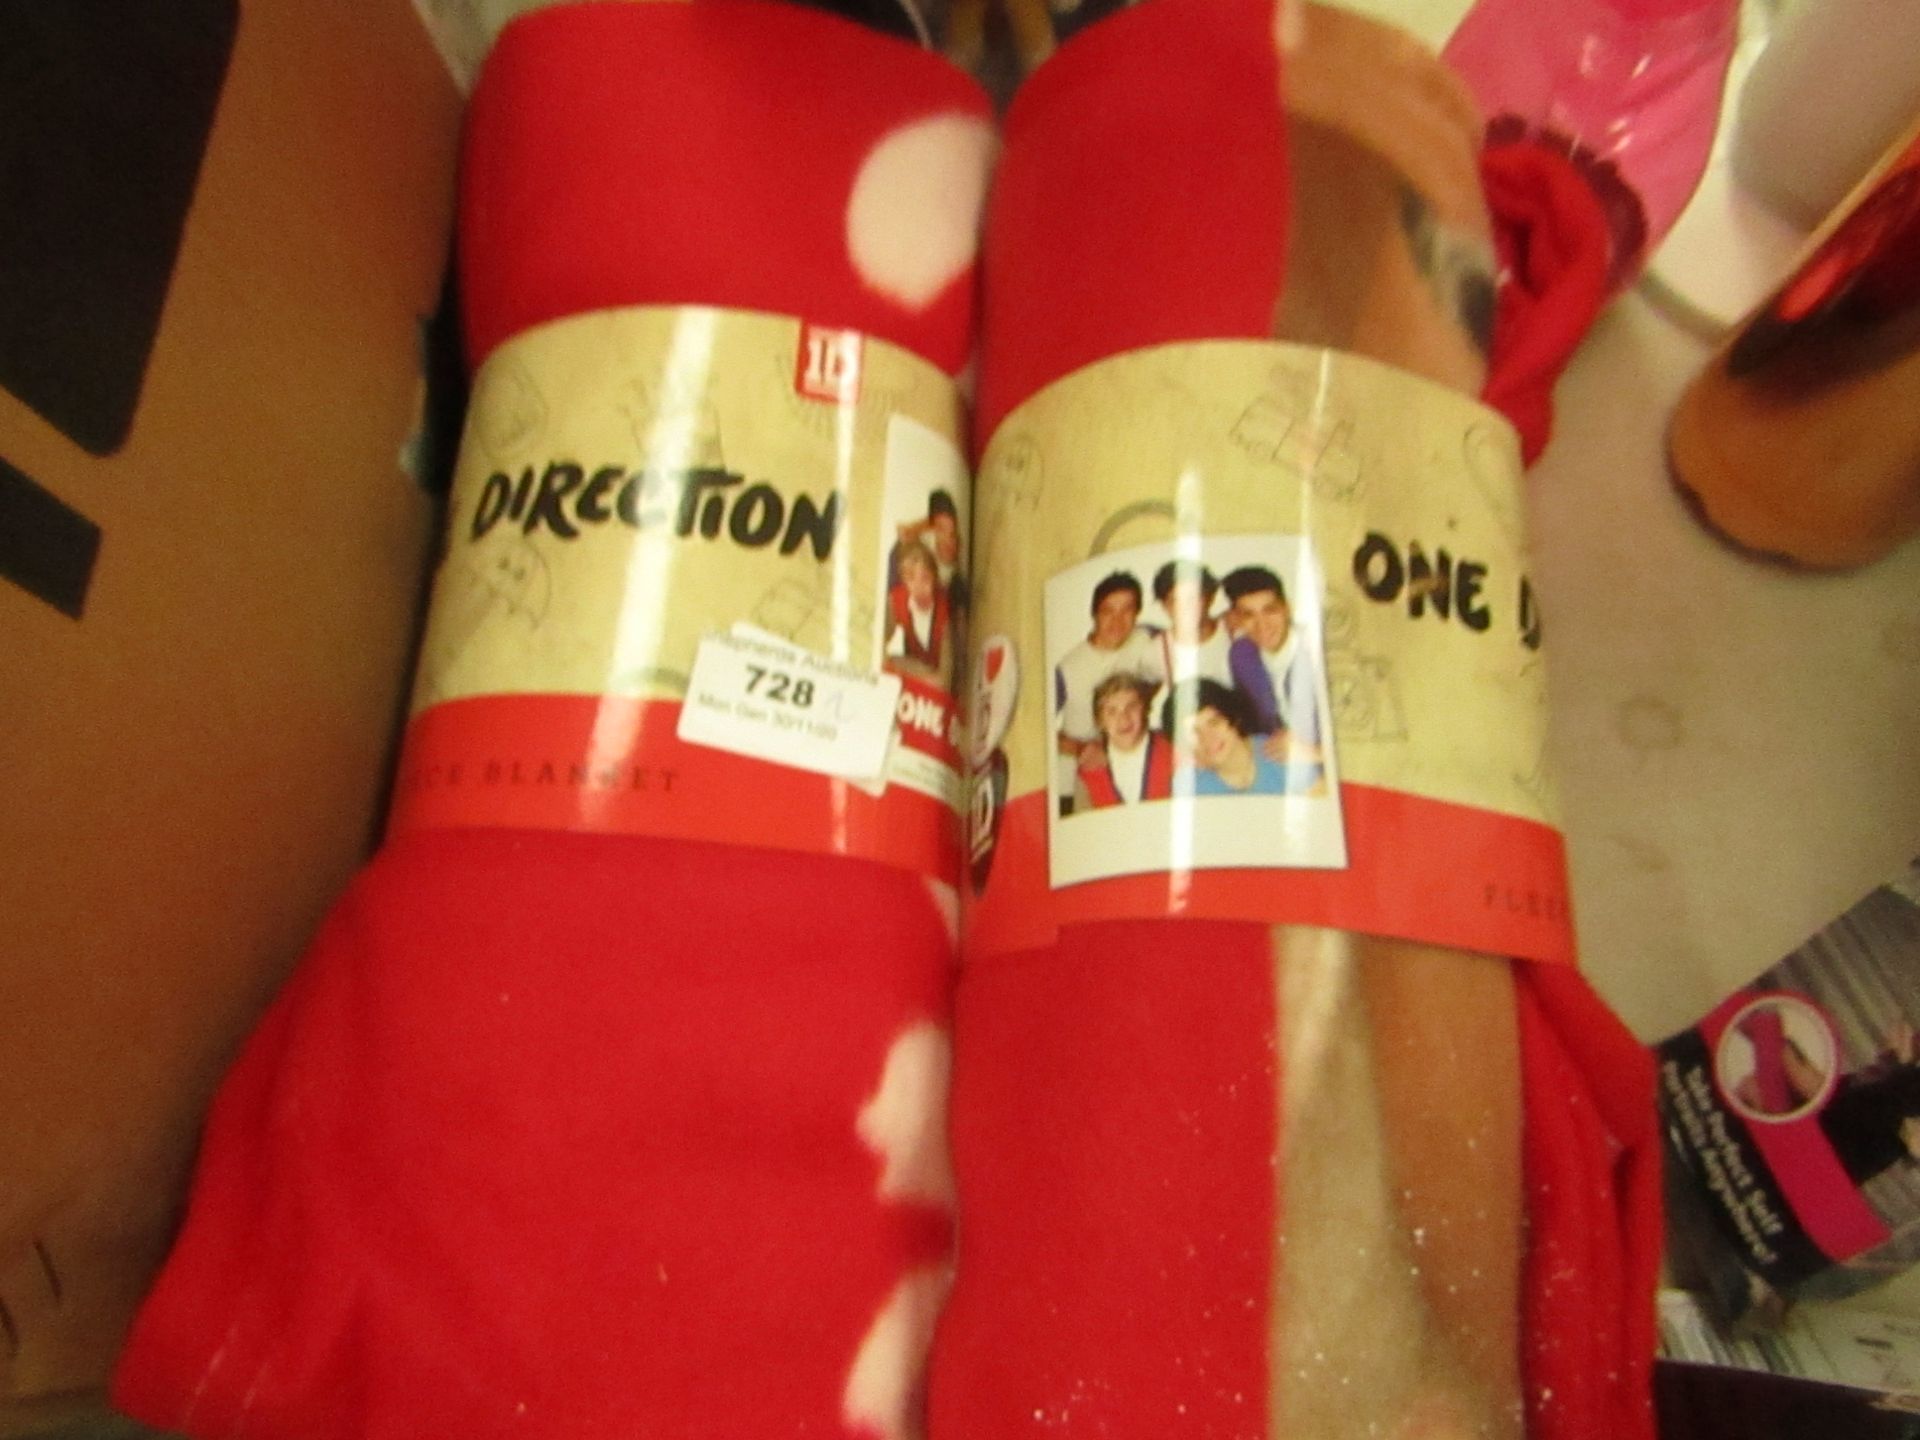 2 x One Direction Fleece Blankets. New with Tags